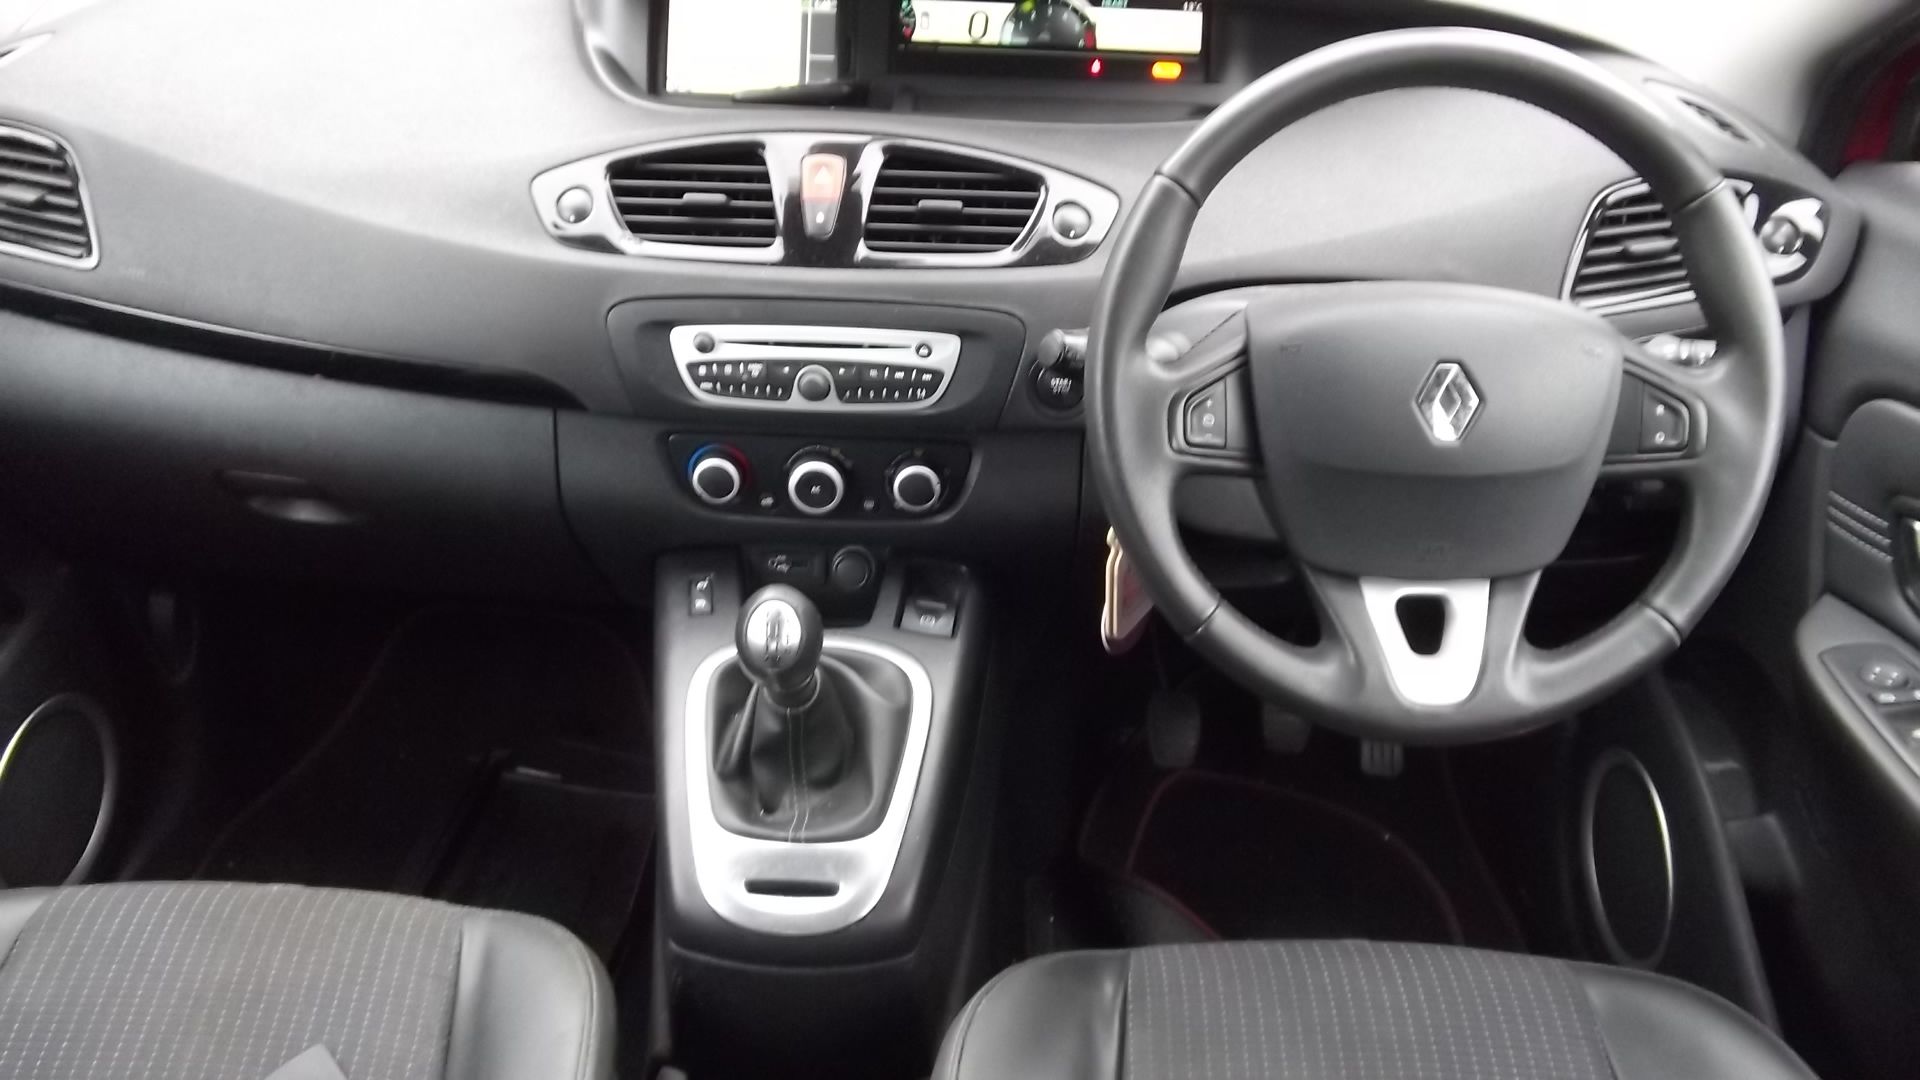 2011 Renault Scenic 1.5 DCI Dynamique Tom Tom 5 Door MPV - Image 7 of 17